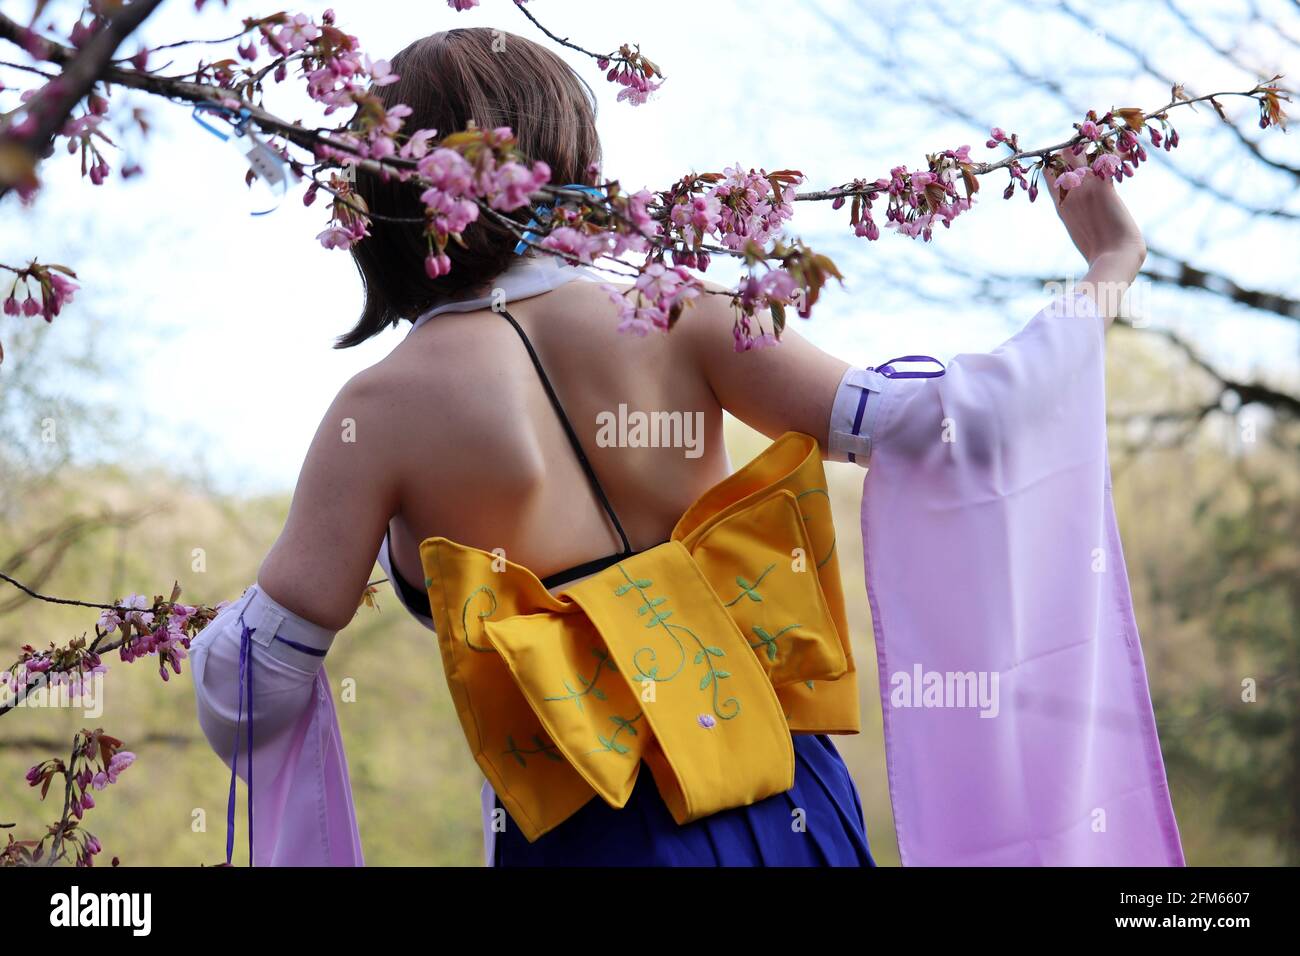 Girl in a traditional Japanese dress standing near the blooming sakura tree, rear view. Cherry blossom season, asian beauty and culture Stock Photo